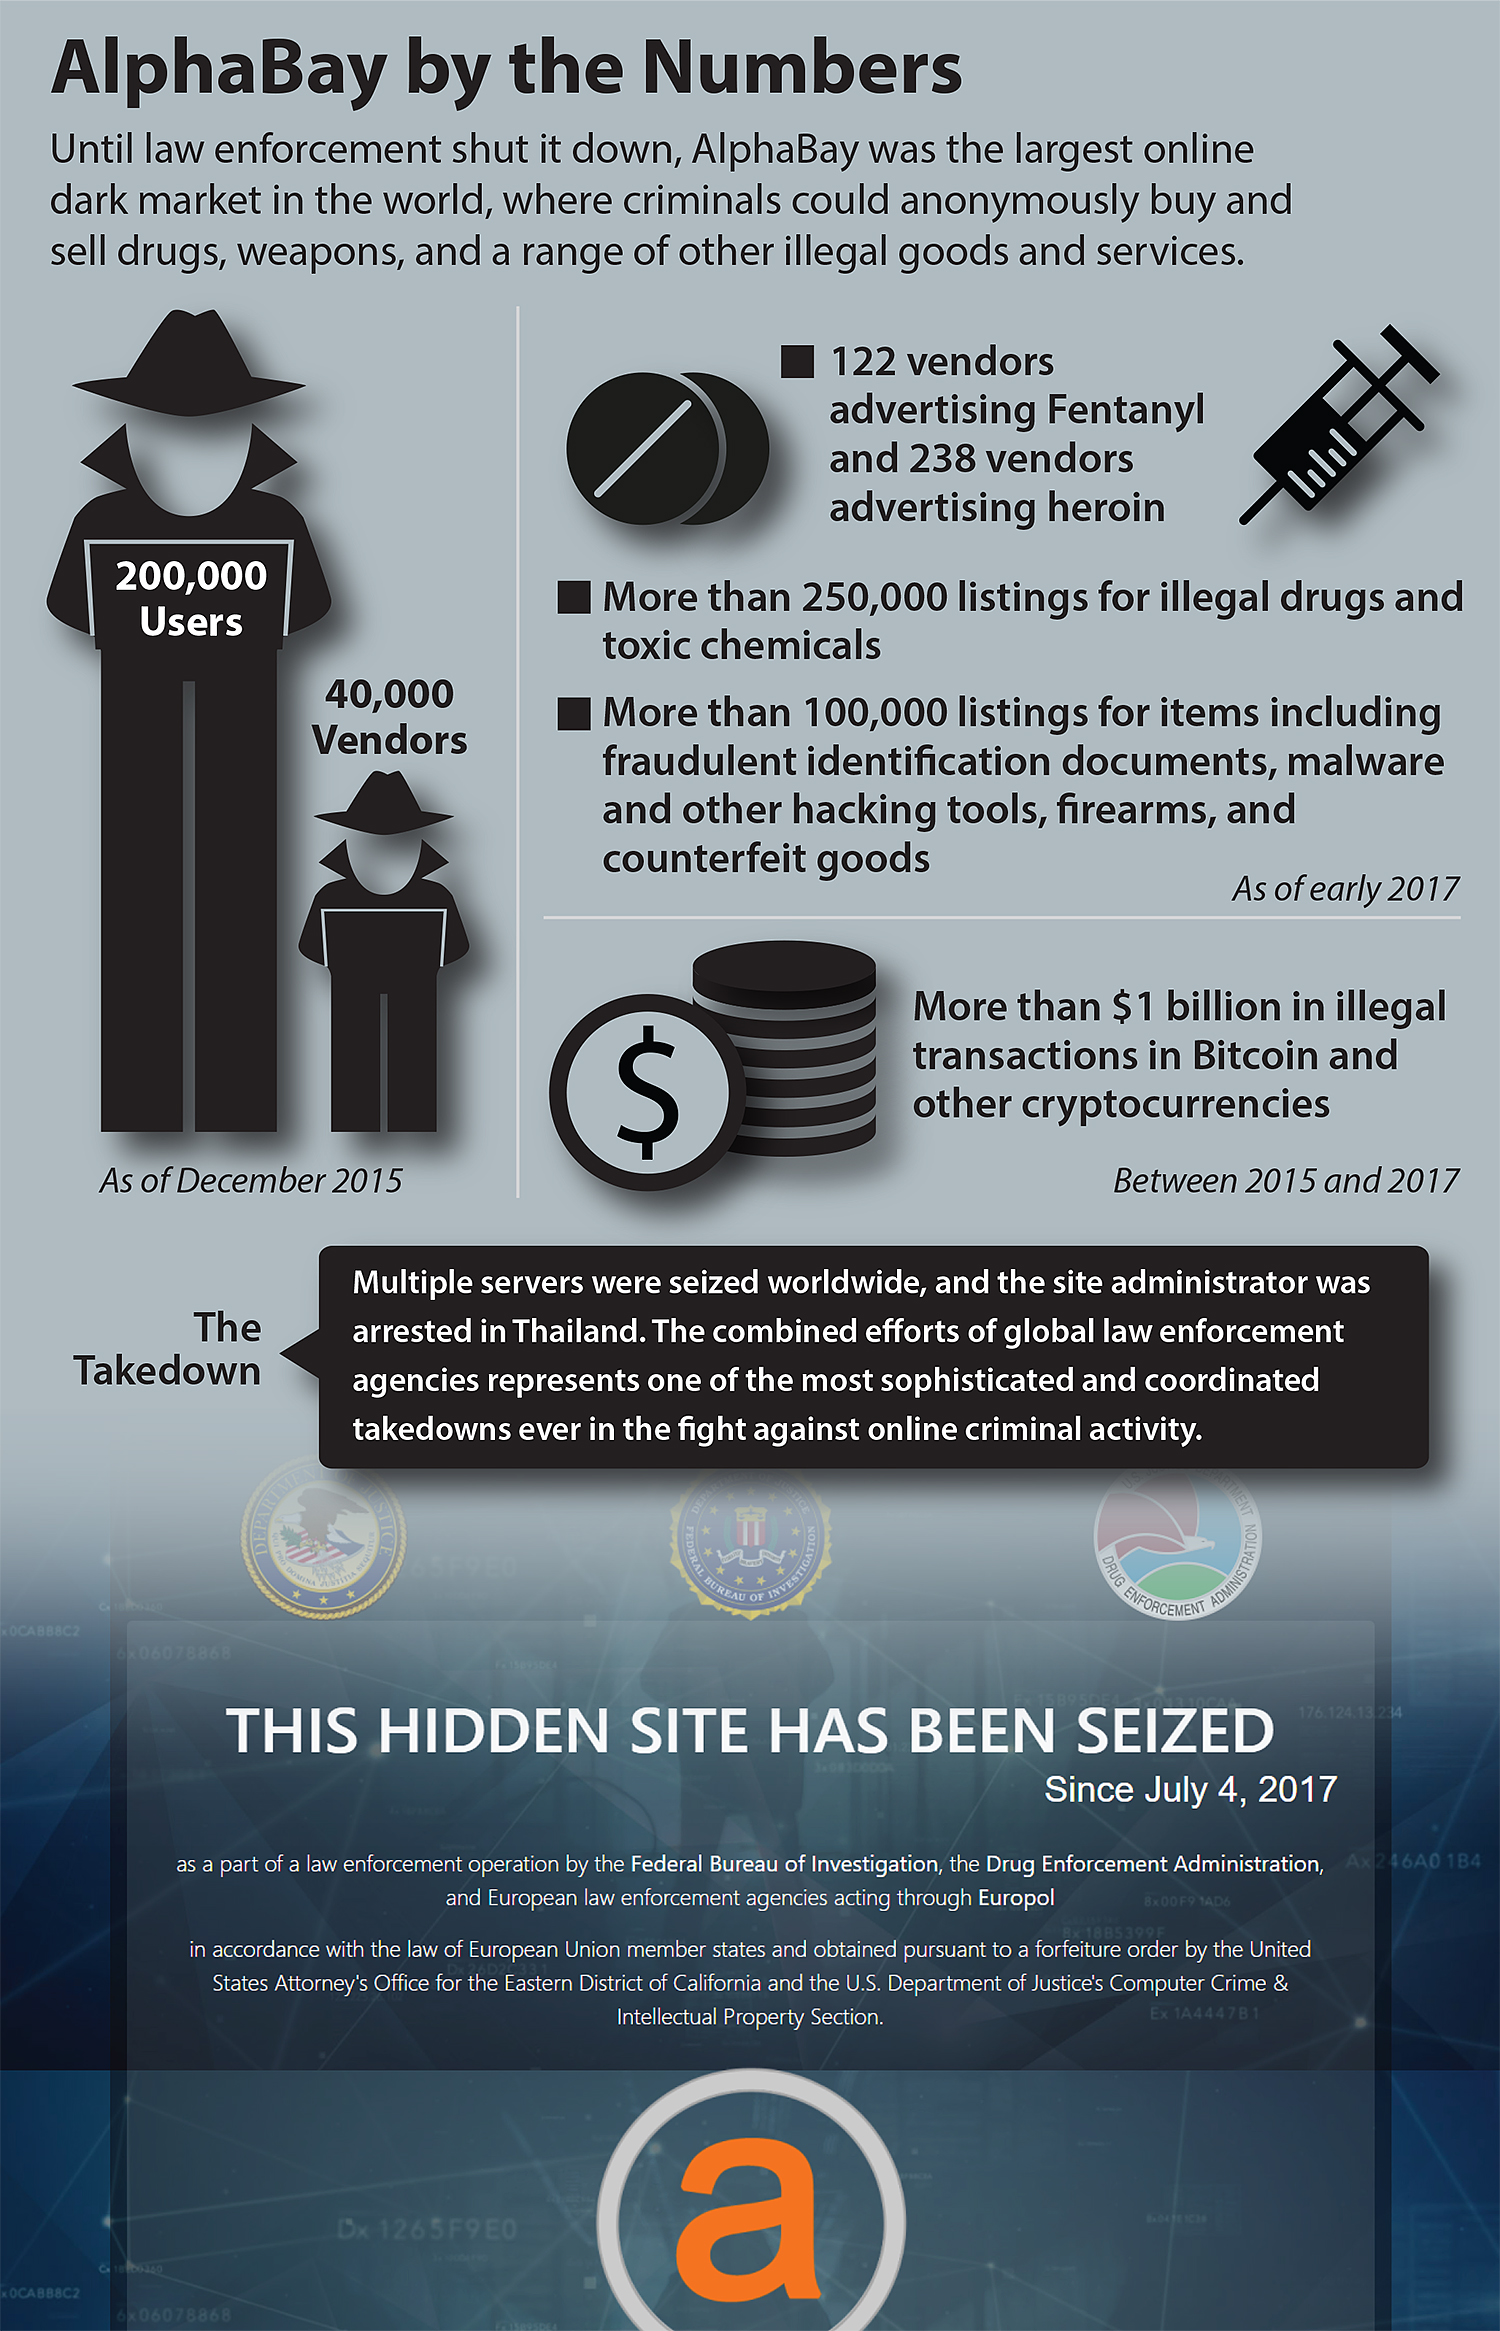 Infographic depicting statistics related to the online Darknet marketplace AlphaBay, the seizure of which was announced by law enforcement officials on July 20, 2017.